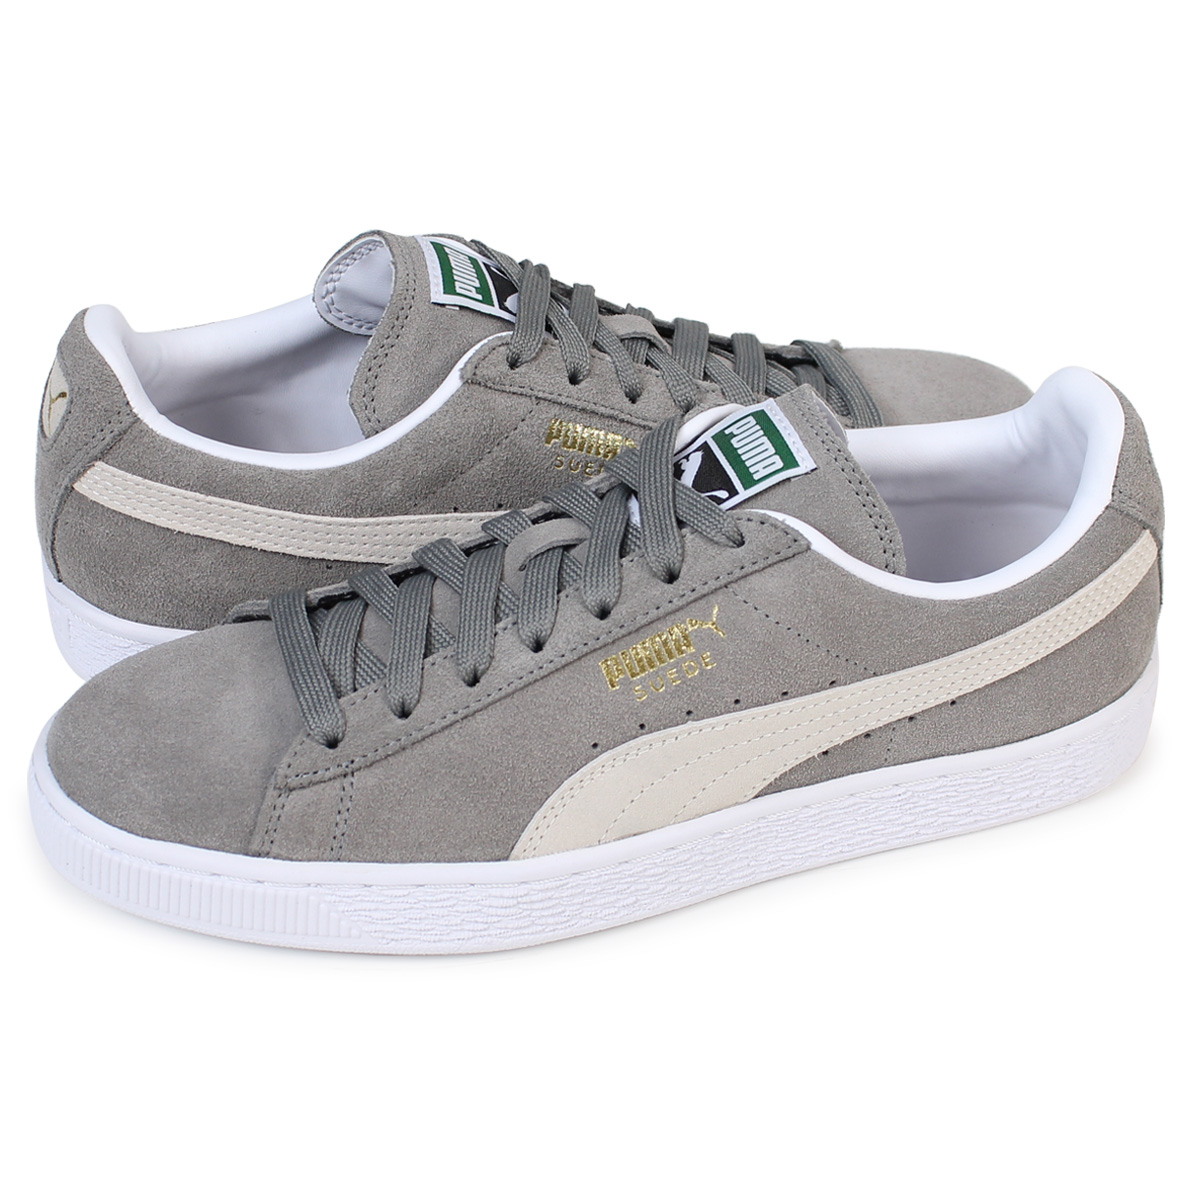 puma sweden shoes,Save up to 17%,www.ilcascinone.com